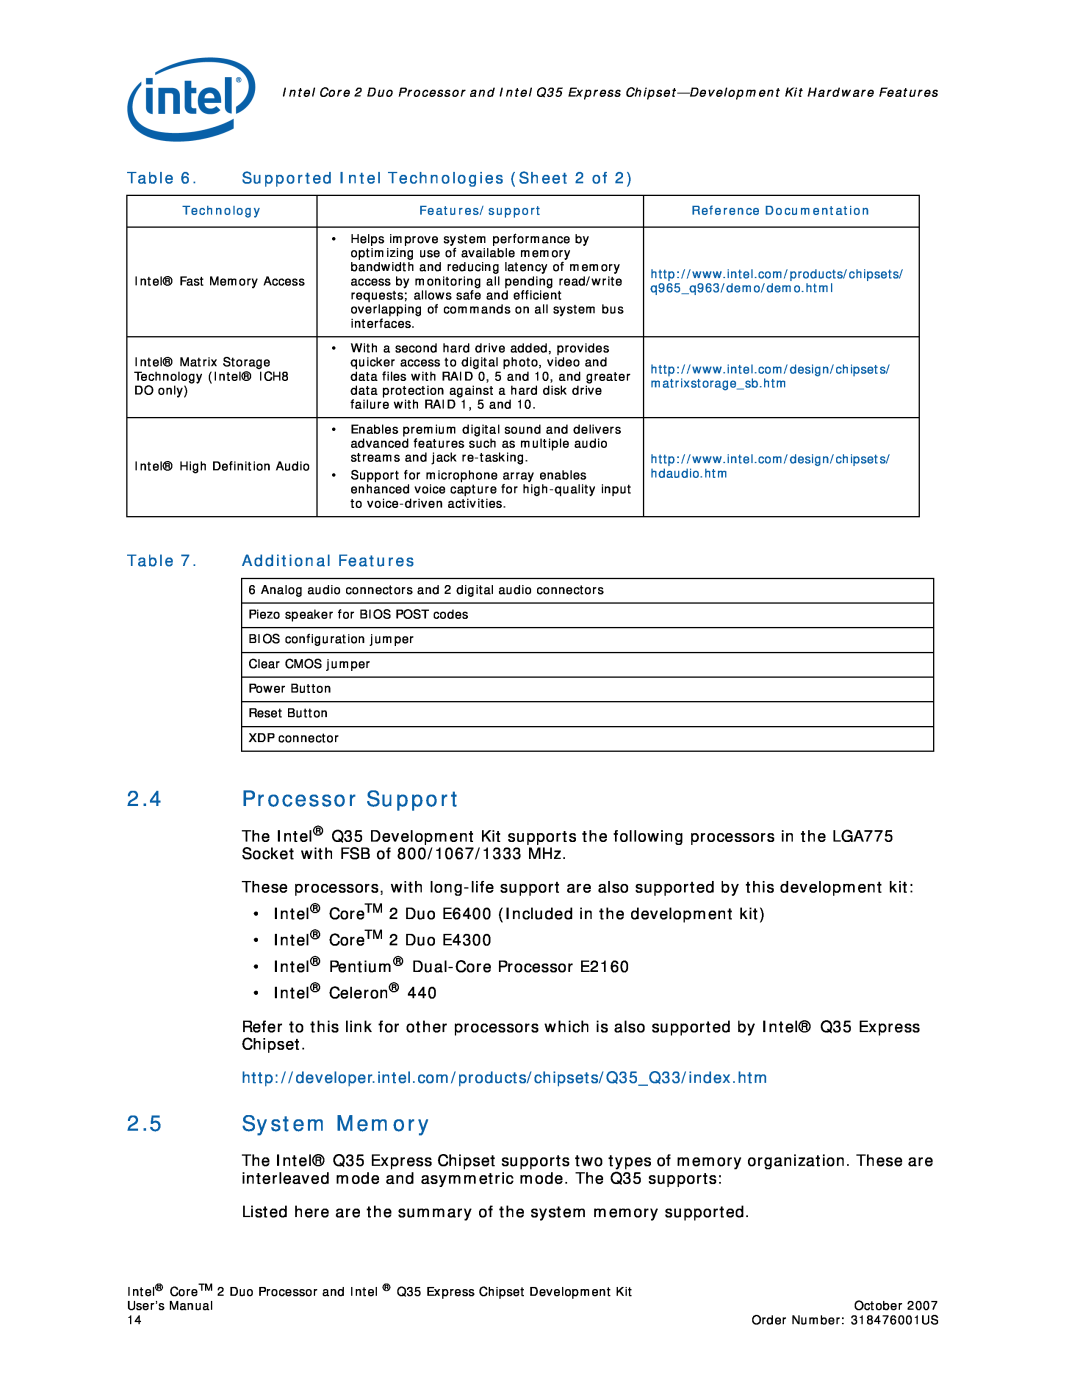 Intel Core 2 Duo user manual Processor Support, System Memory, Supported Intel Technologies Sheet 2 of, Additional Features 